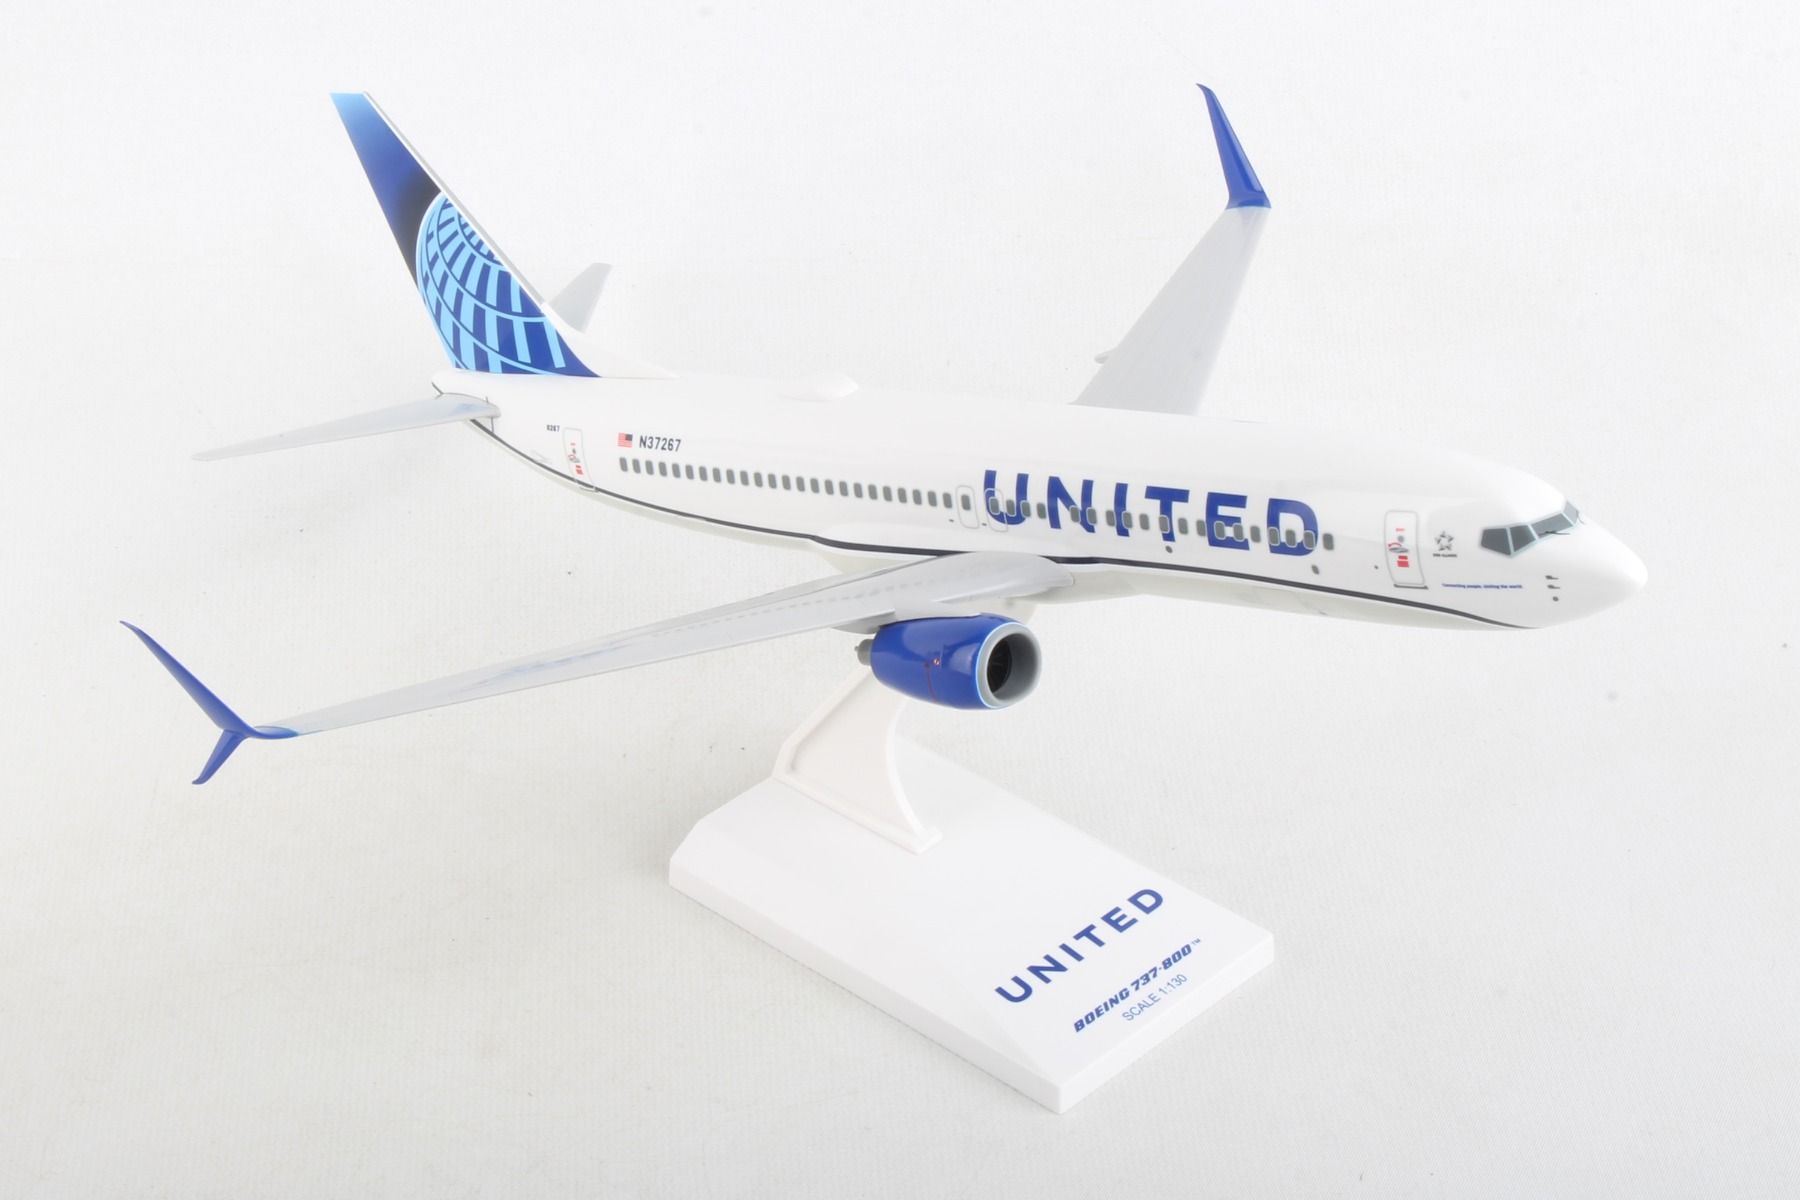 1:200 INFLIGHT200 UNITED AIRLINES B 737-800 MODEL AIRPLANE IF738UA0619 NEW 